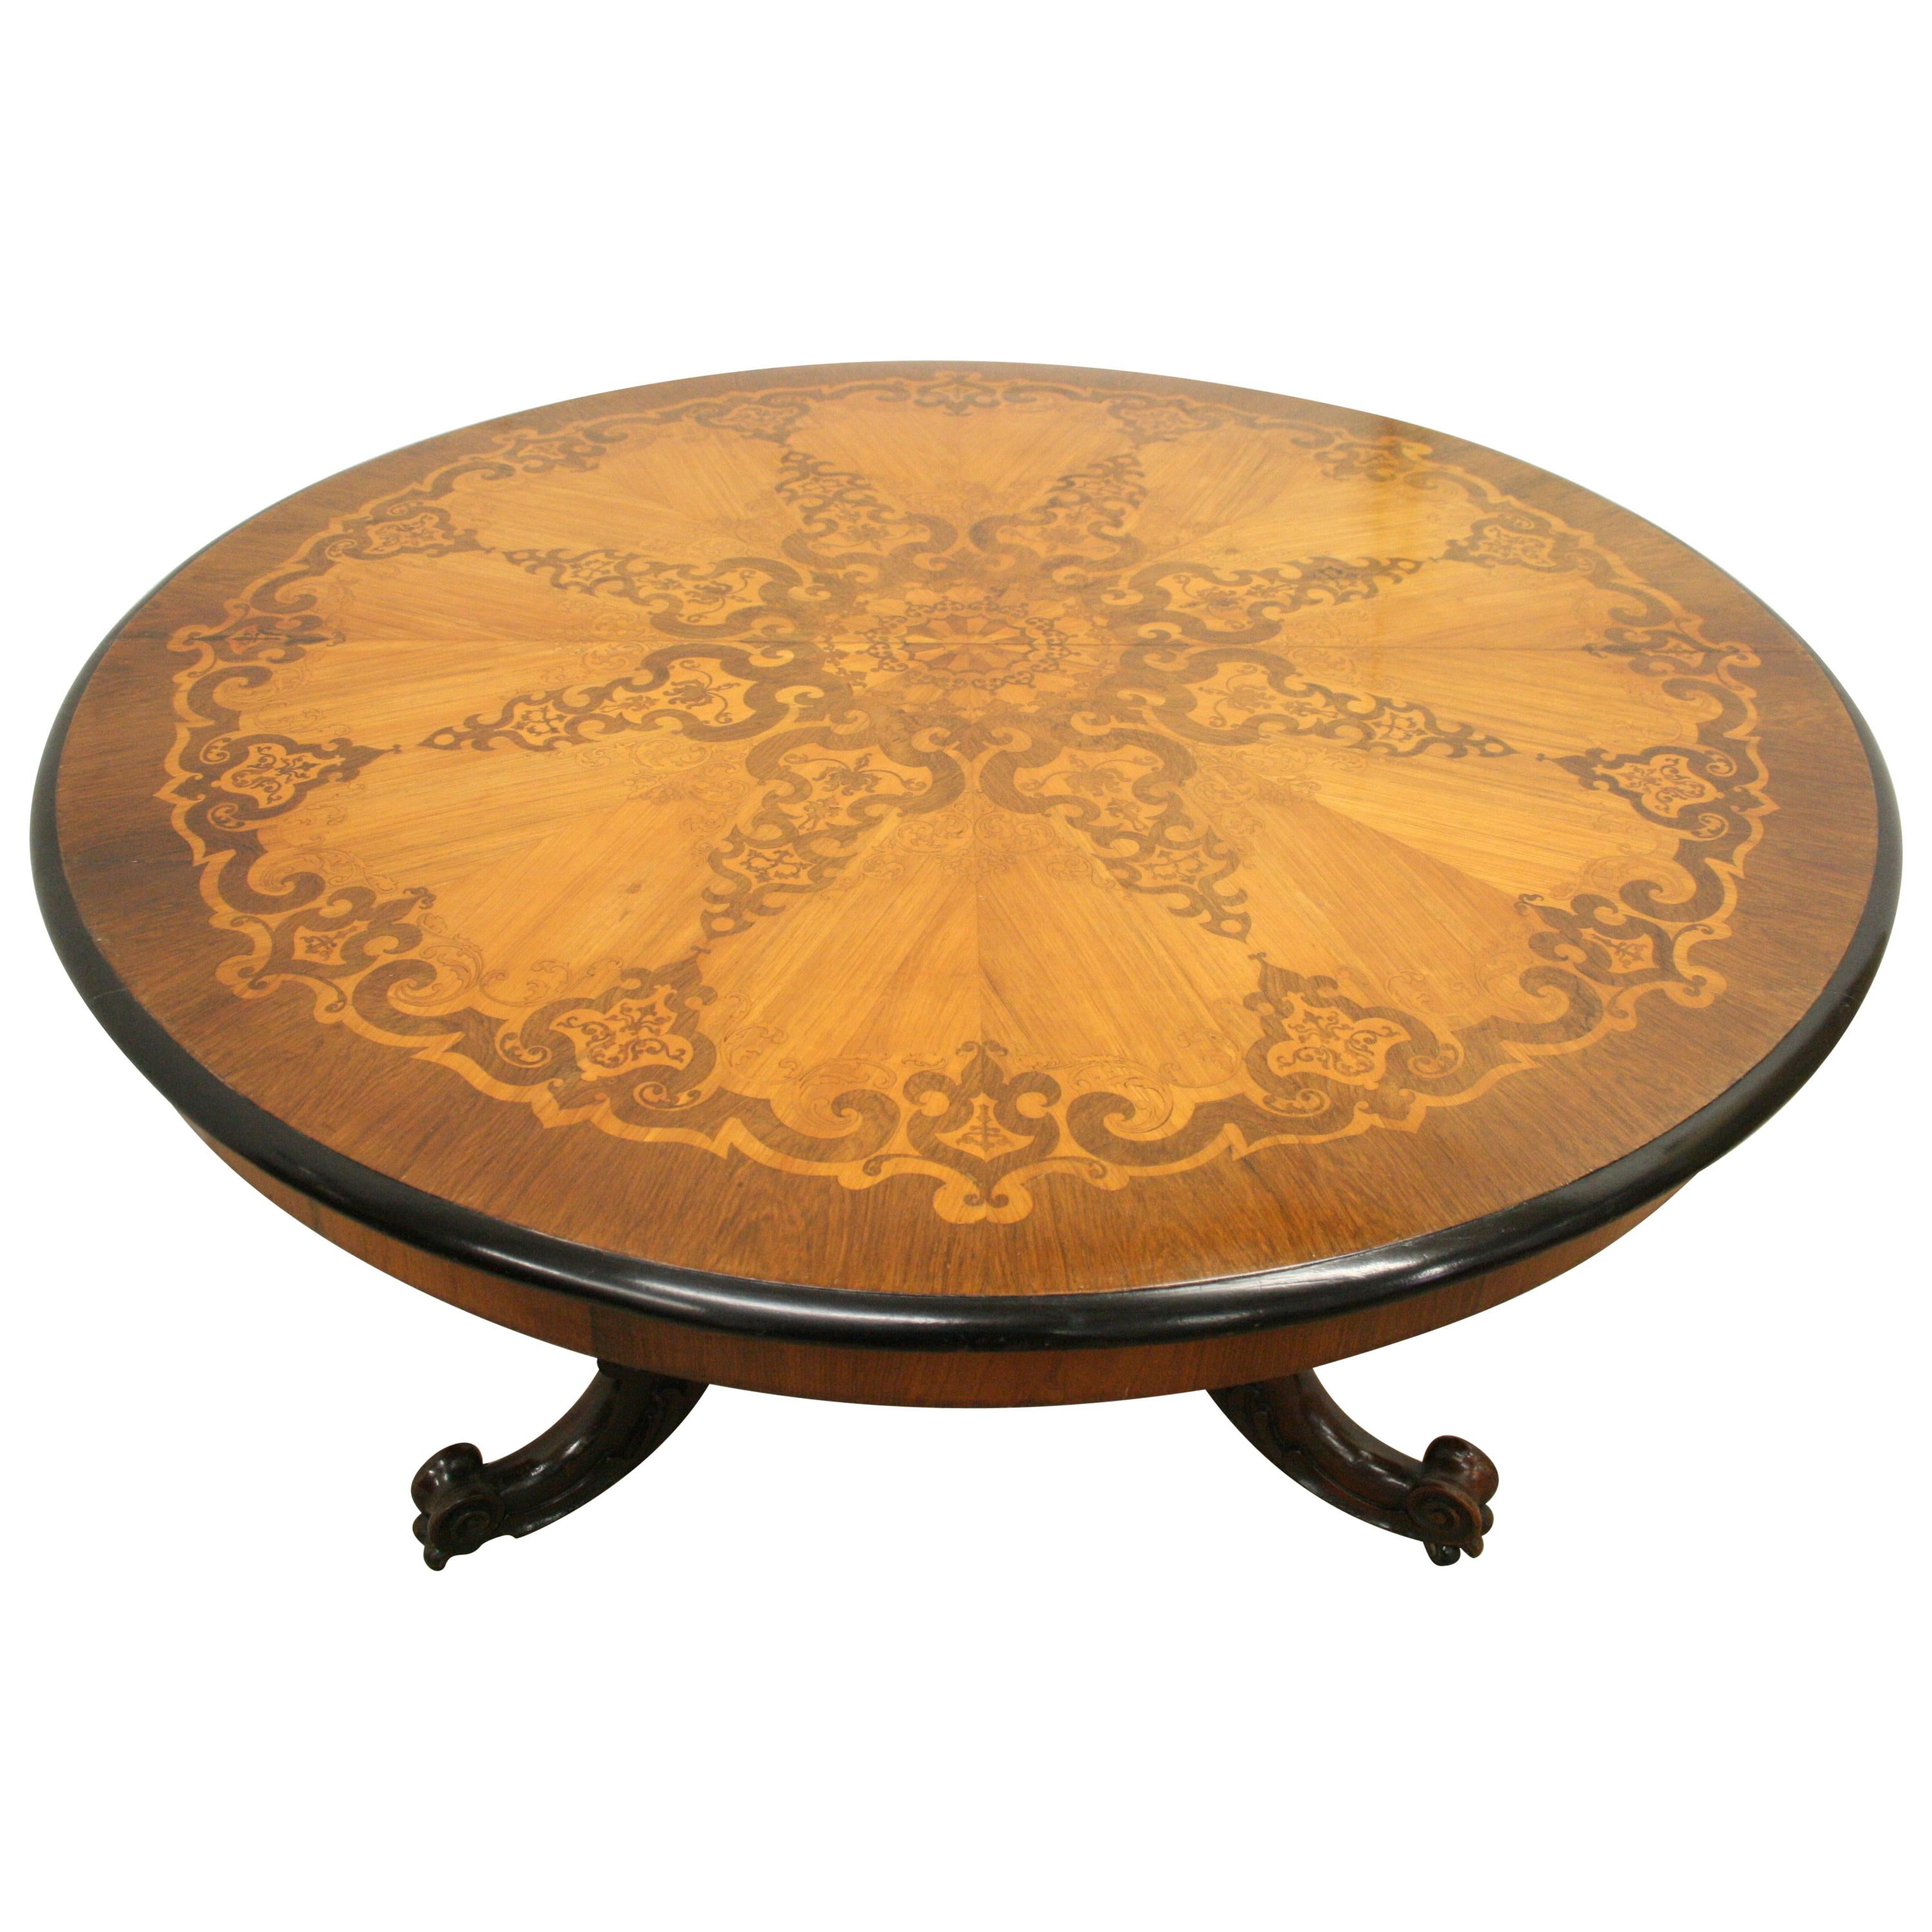  Victorian Marquetry Inlaid Circular Breakfast Table For Sale